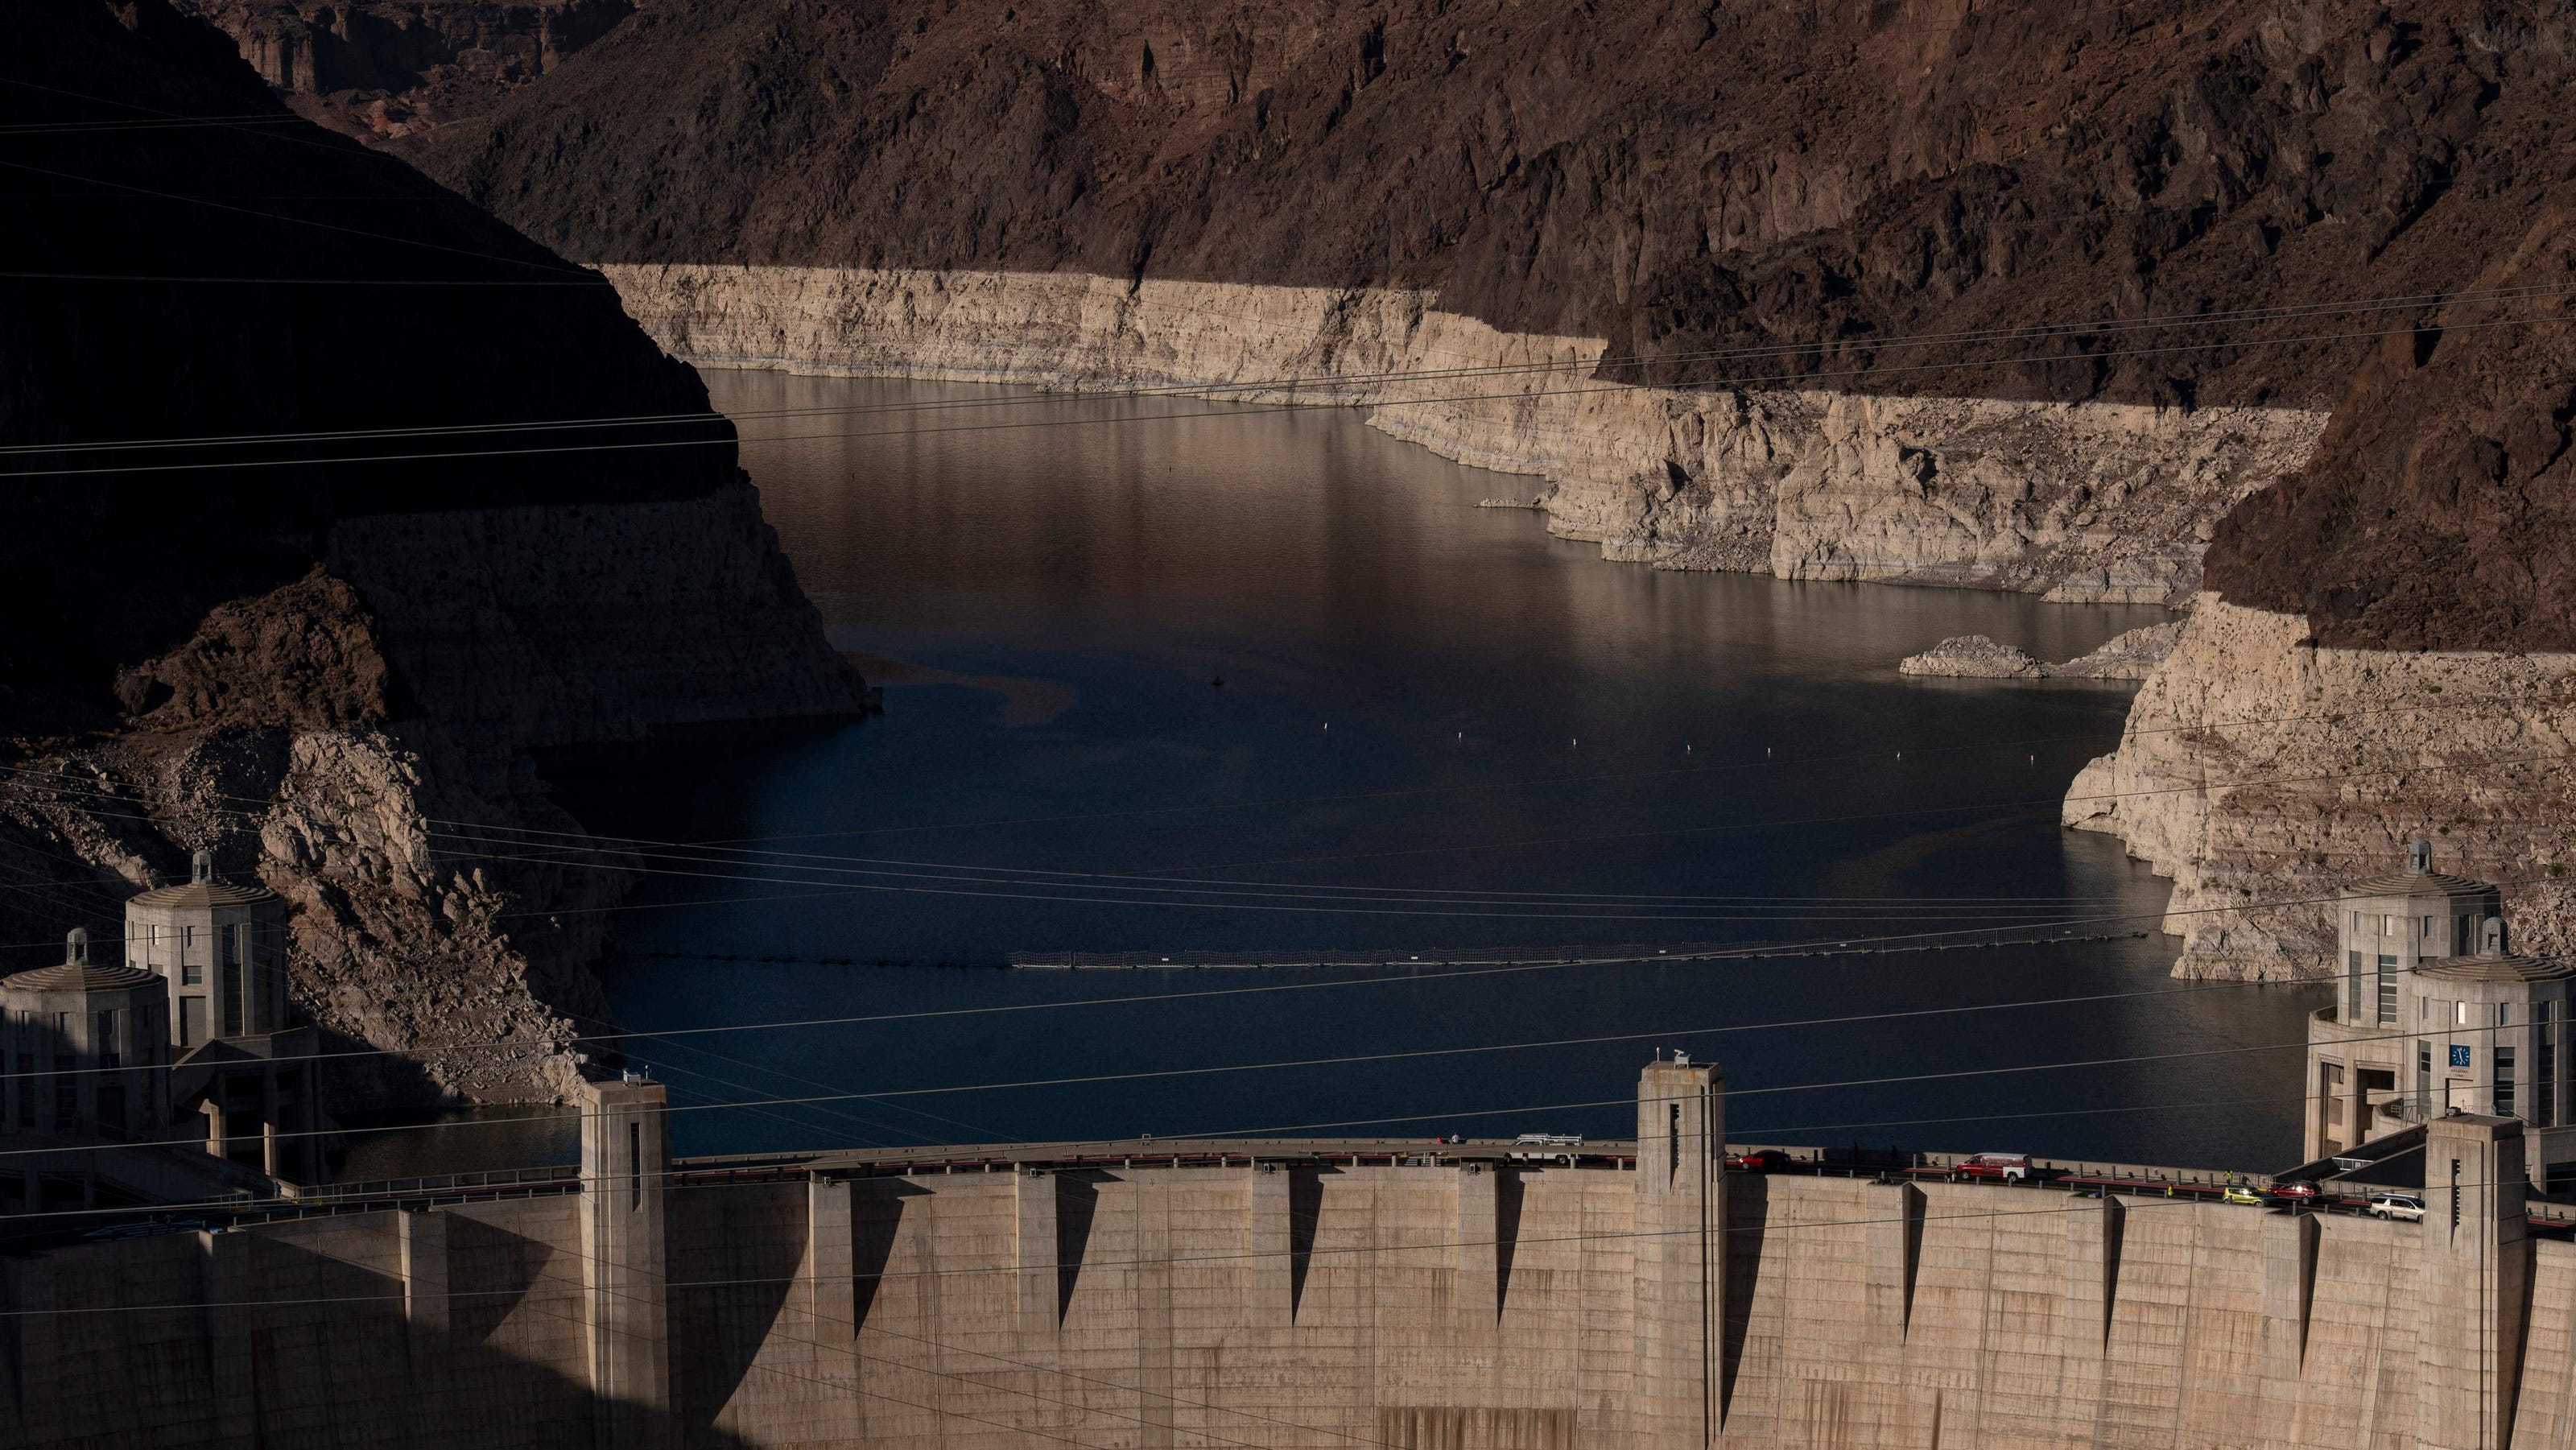 More human remains found in Lake Mead amid historic low water levels